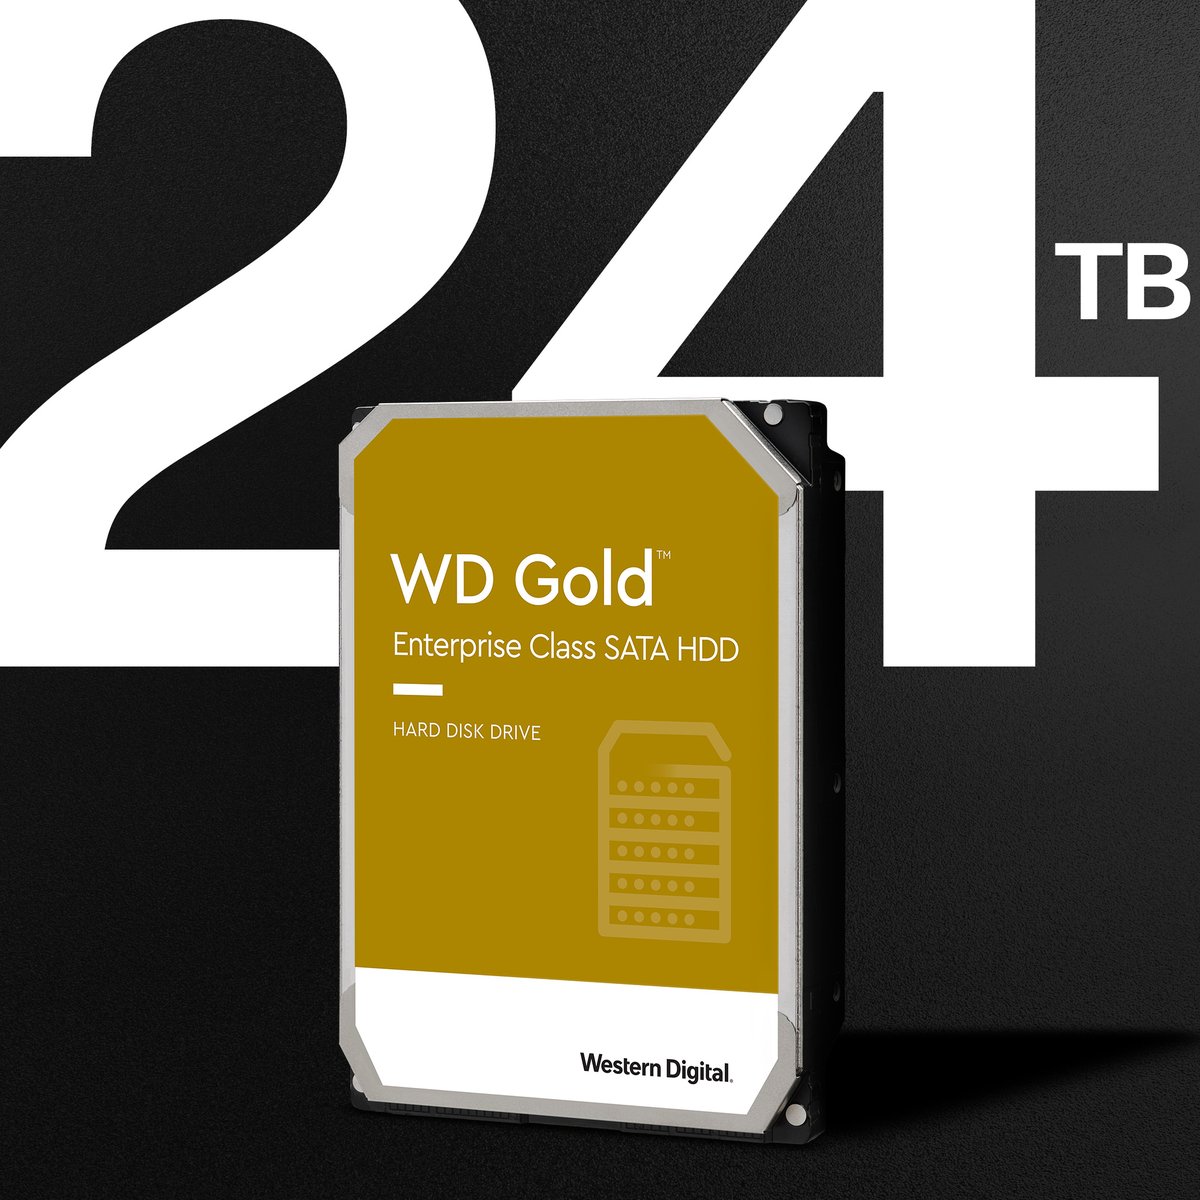 Go for Gold. Capacities up to 24TB, now available. Shop now: bit.ly/3PXODbO